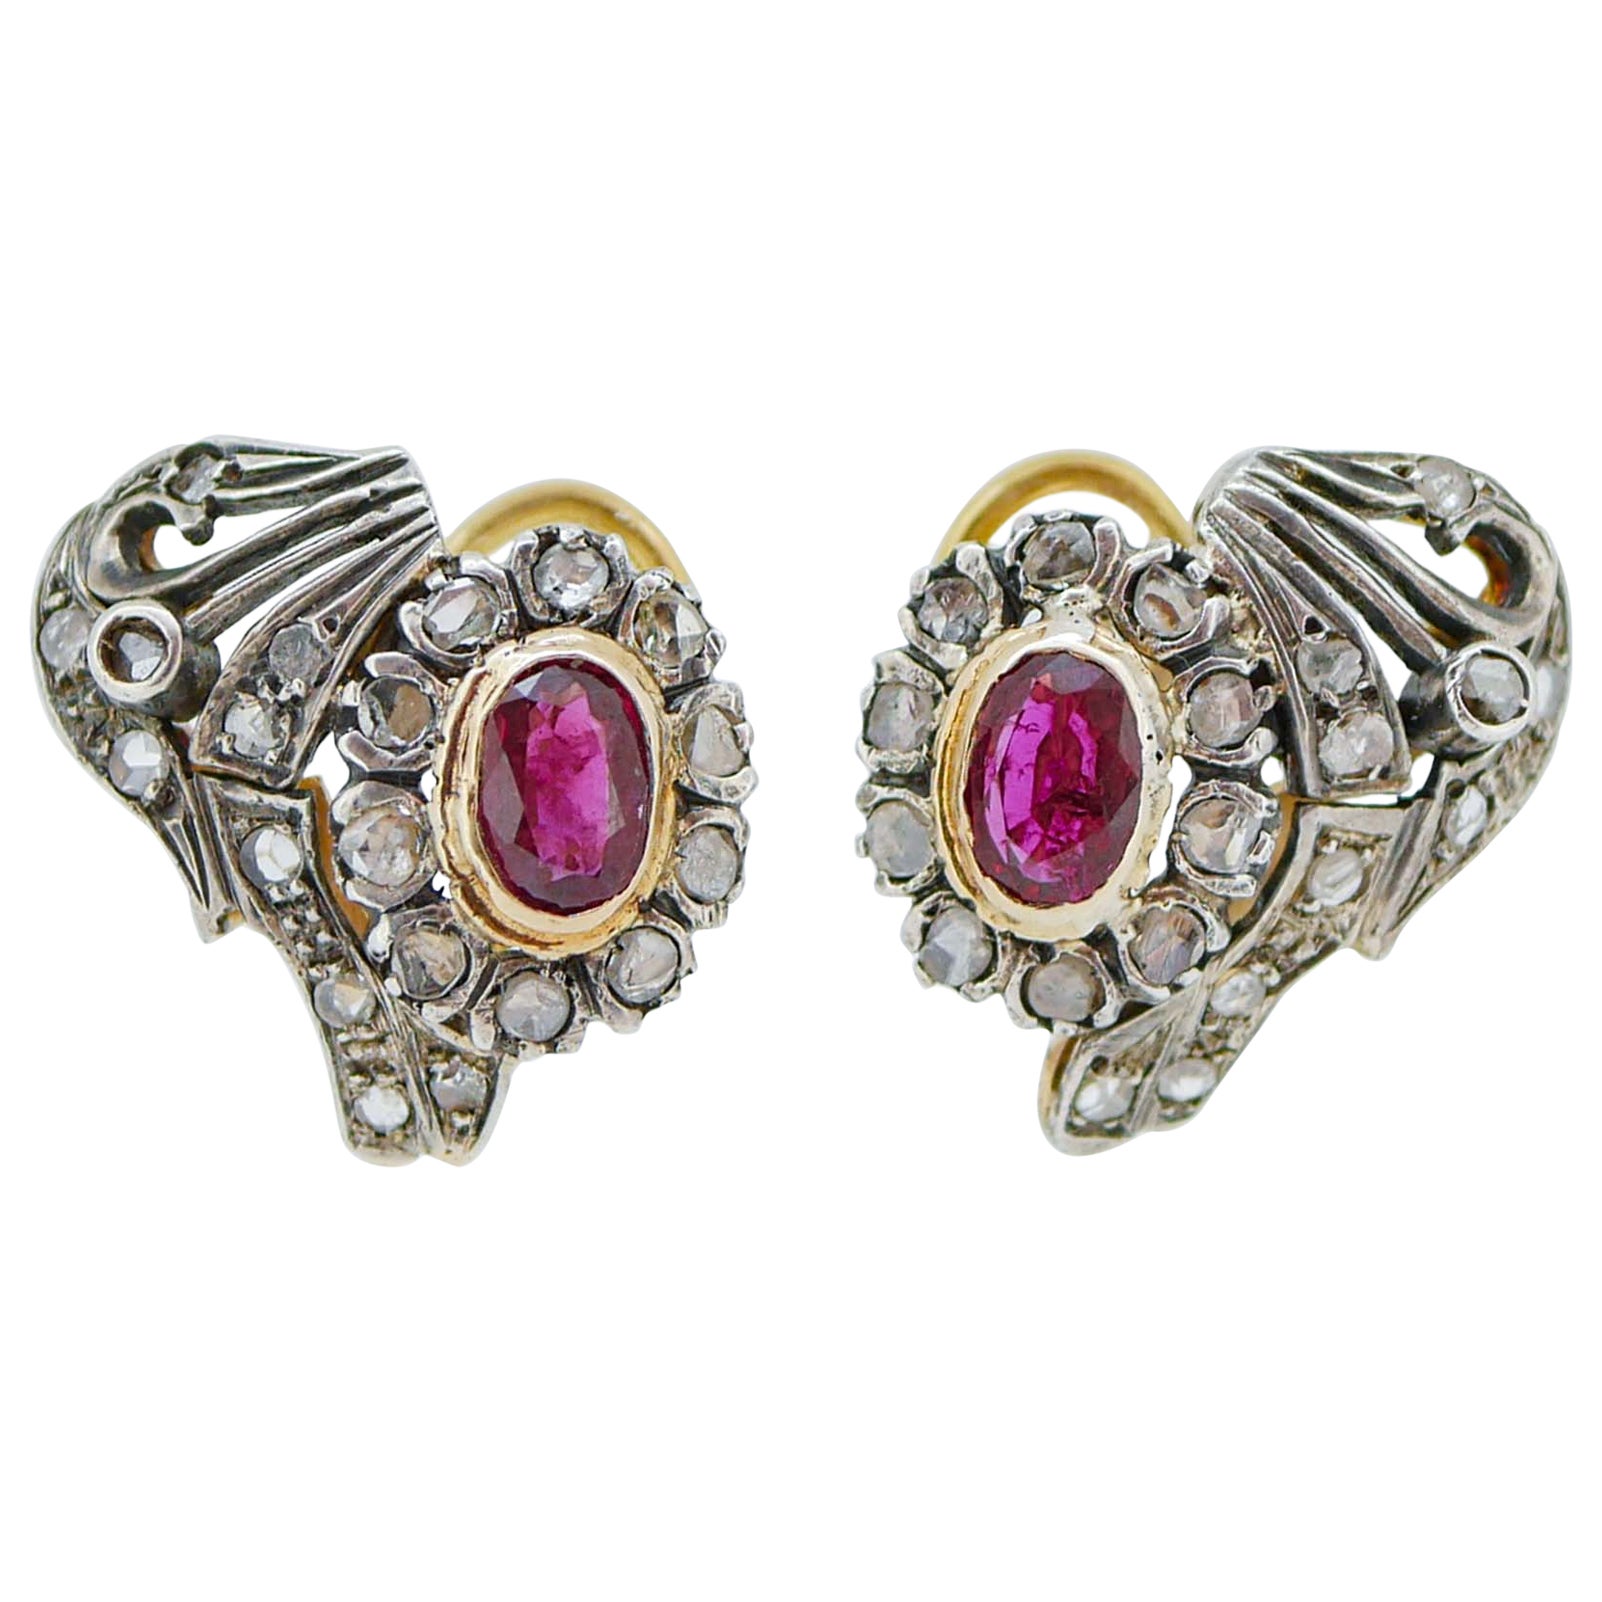 Rubies, Diamonds, 18 Karat Rose Gold and Silver Earrings. For Sale